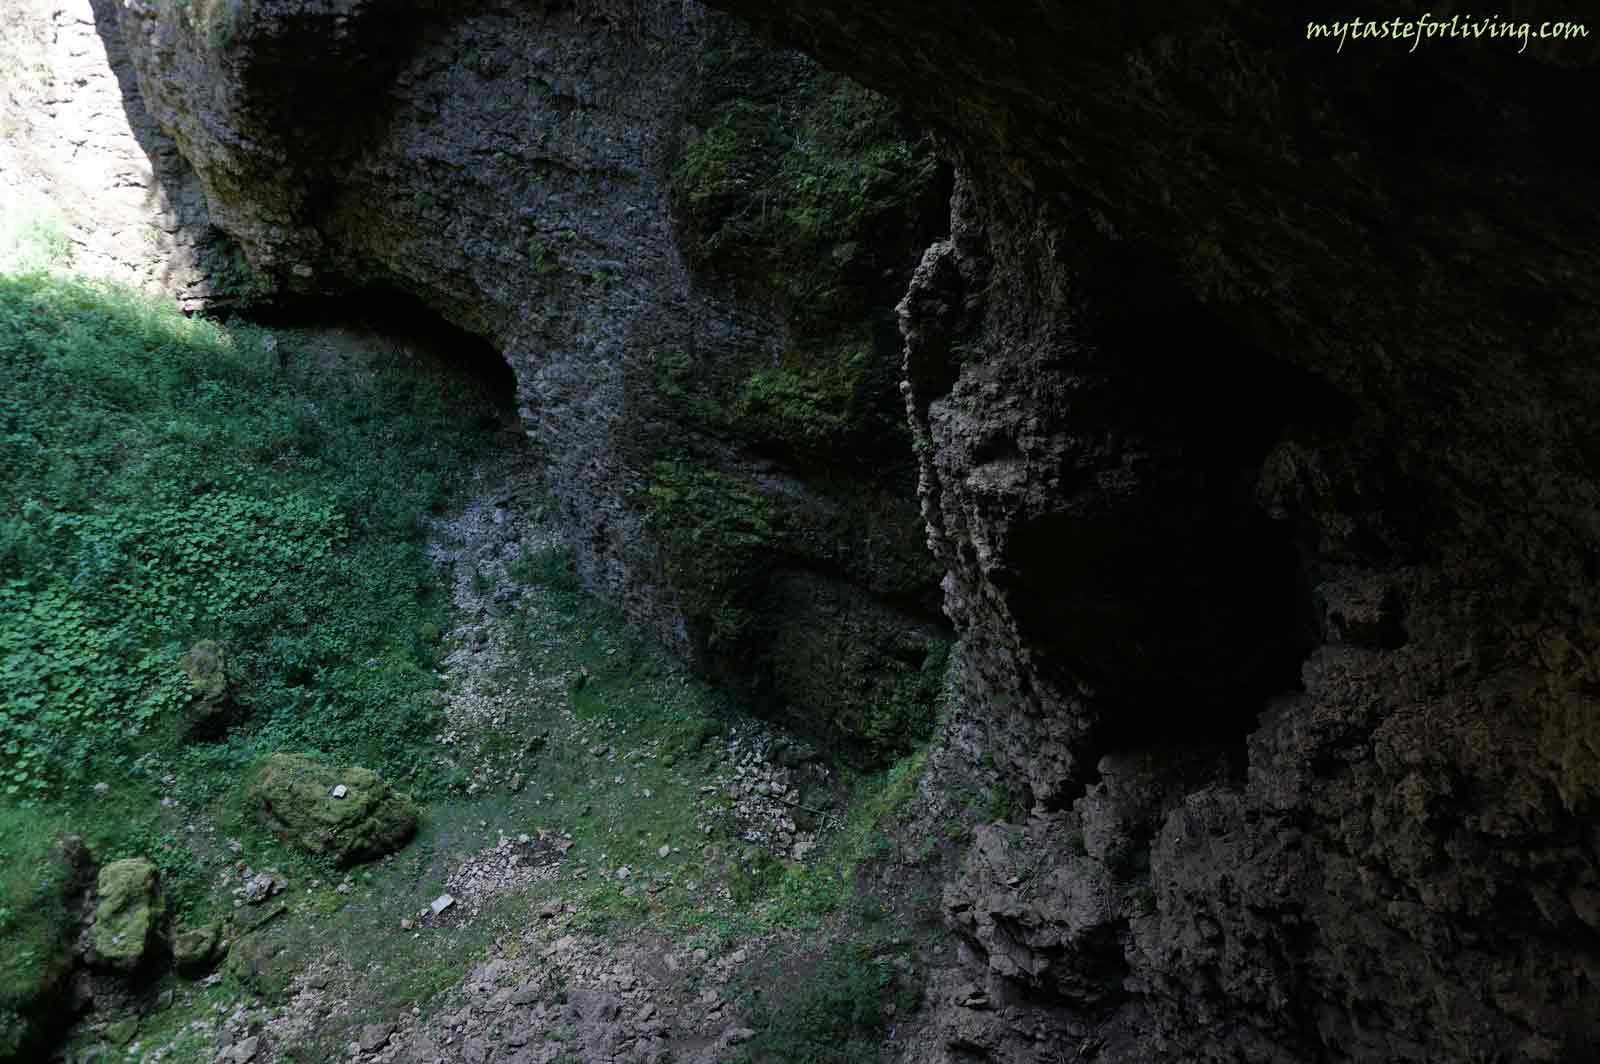 Big Garvanitsa cave is located between the villages of Gorsko Slivovo and Karpachevo, Lovech district, Bulgaria. It is a vertical cave with a depth of over 60 meters and a length of 275 meters.